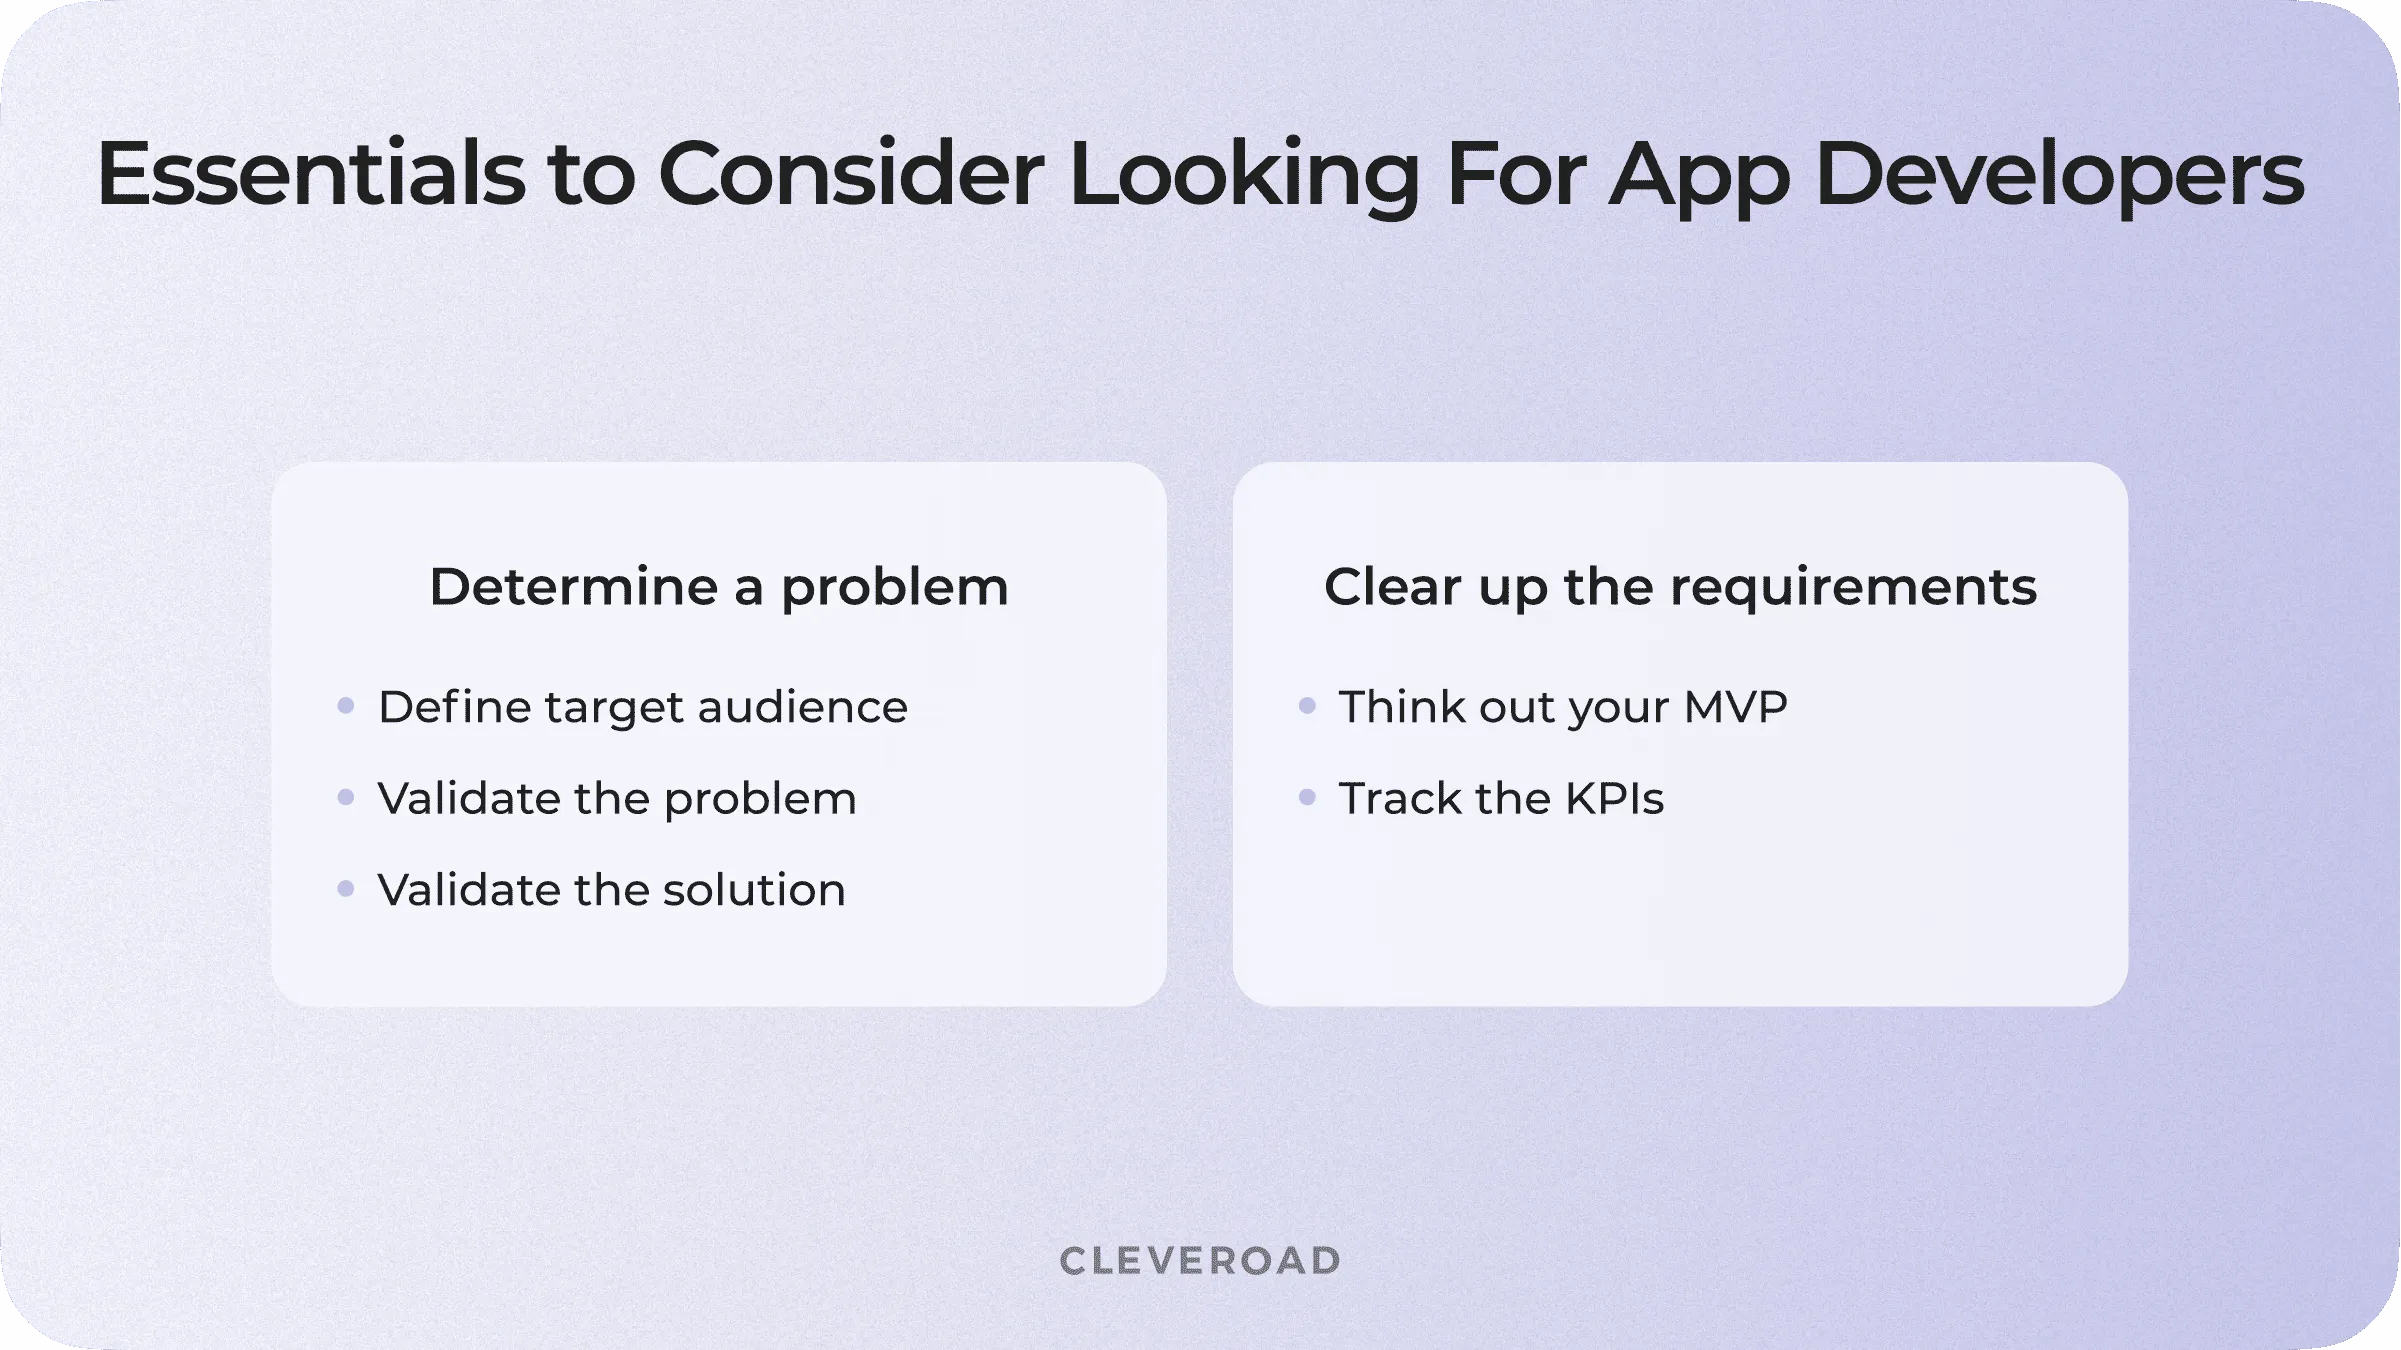 Essentials to consider looking for app developers